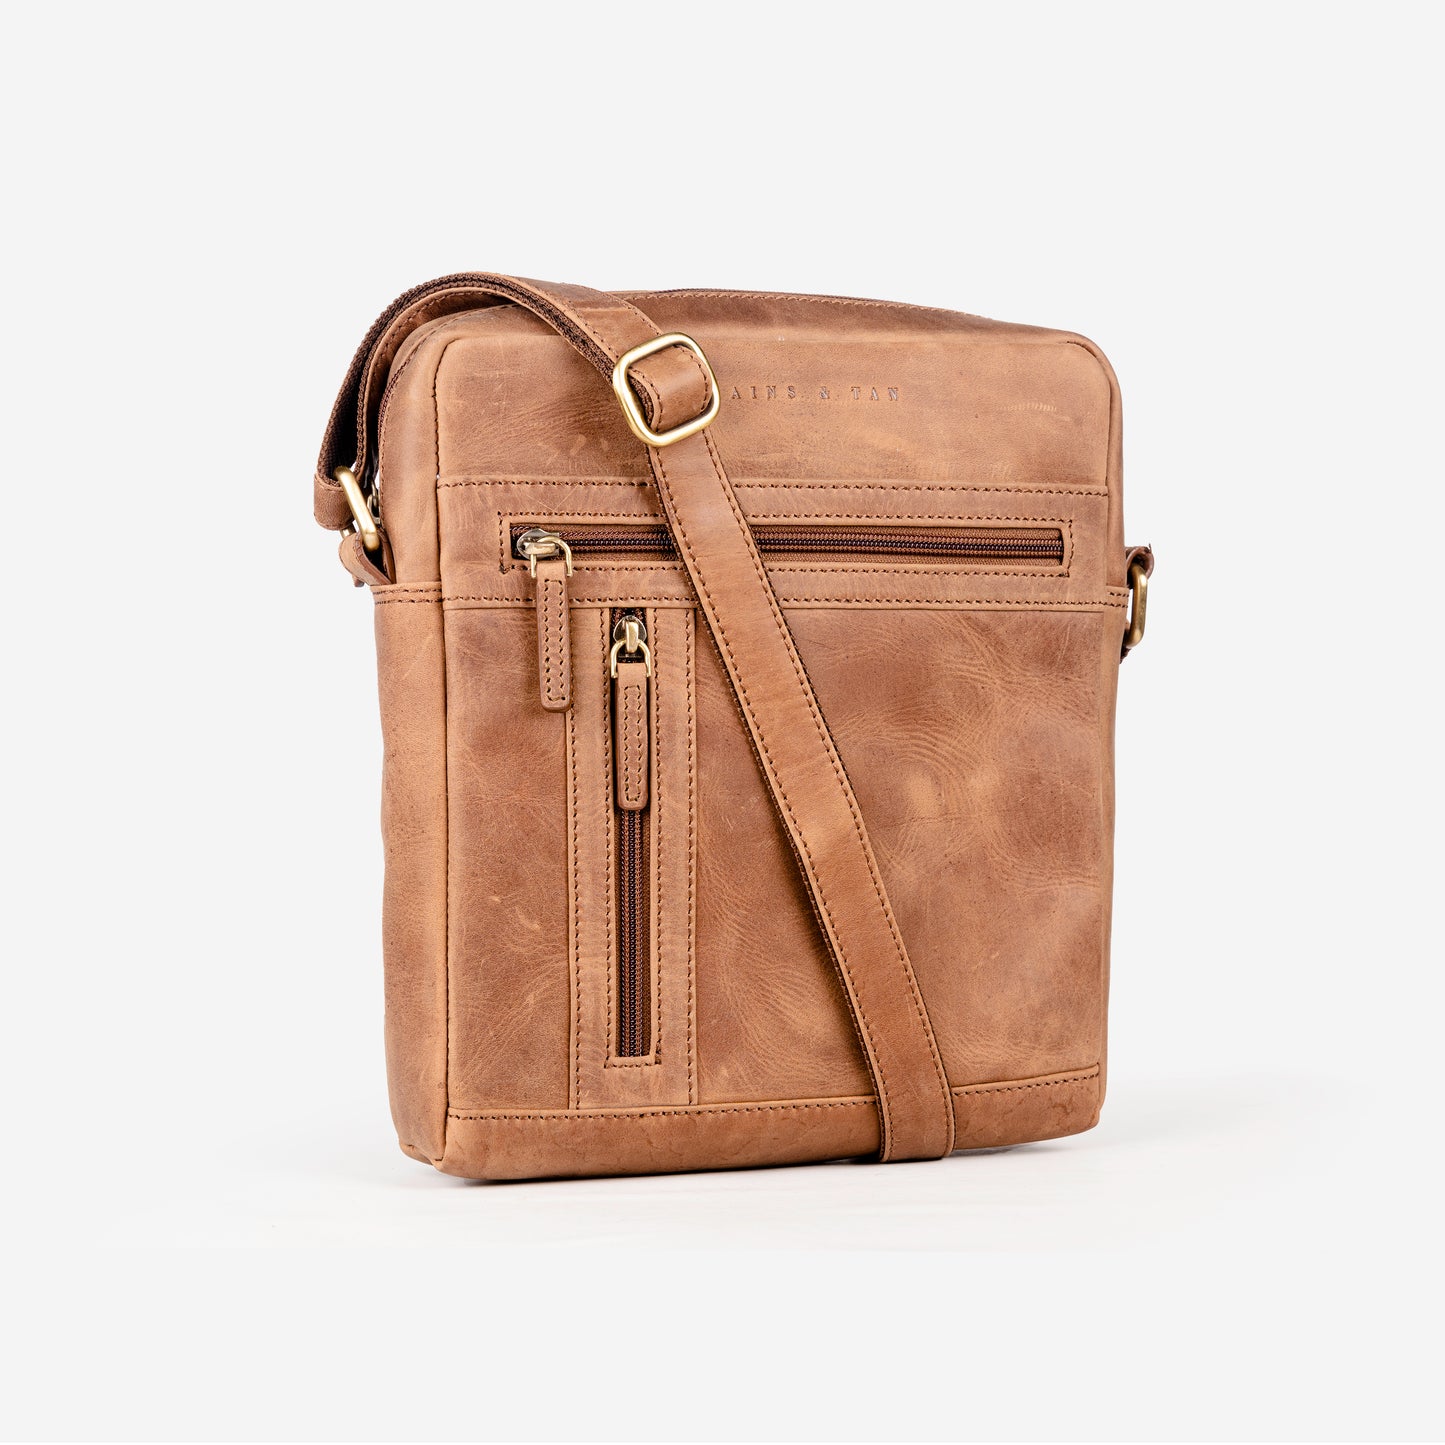 GT-RM3: Medium Leather Crossbody Messenger (RFID Protected) by Grains & Tan